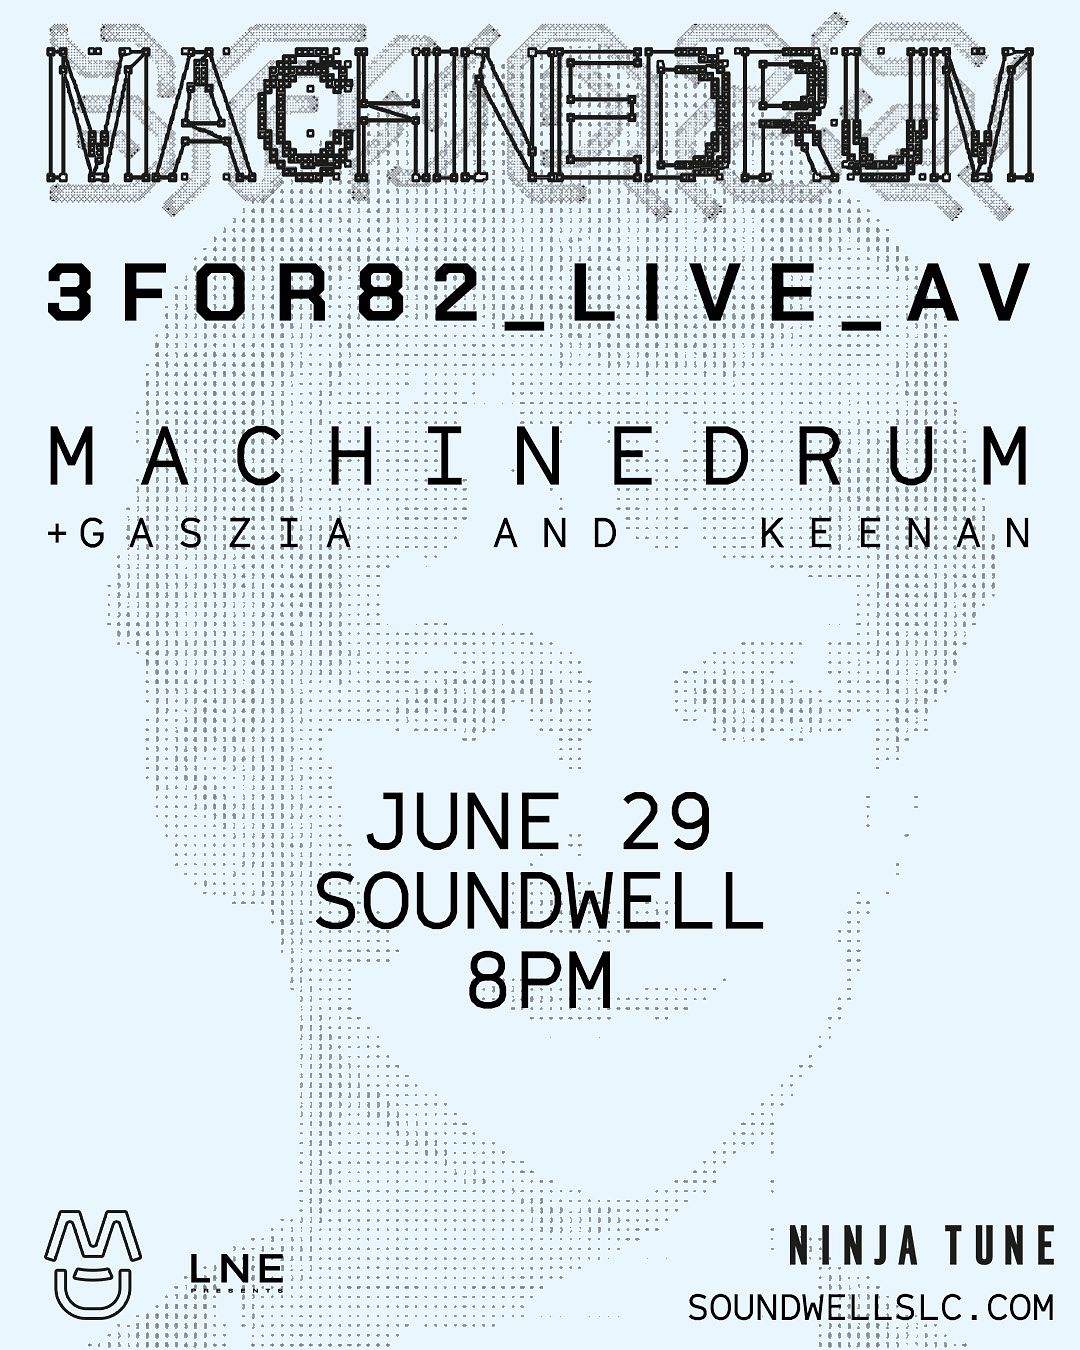 MACHINEDRUM_3FOR82_LIVE_A/V_ - フライヤー表